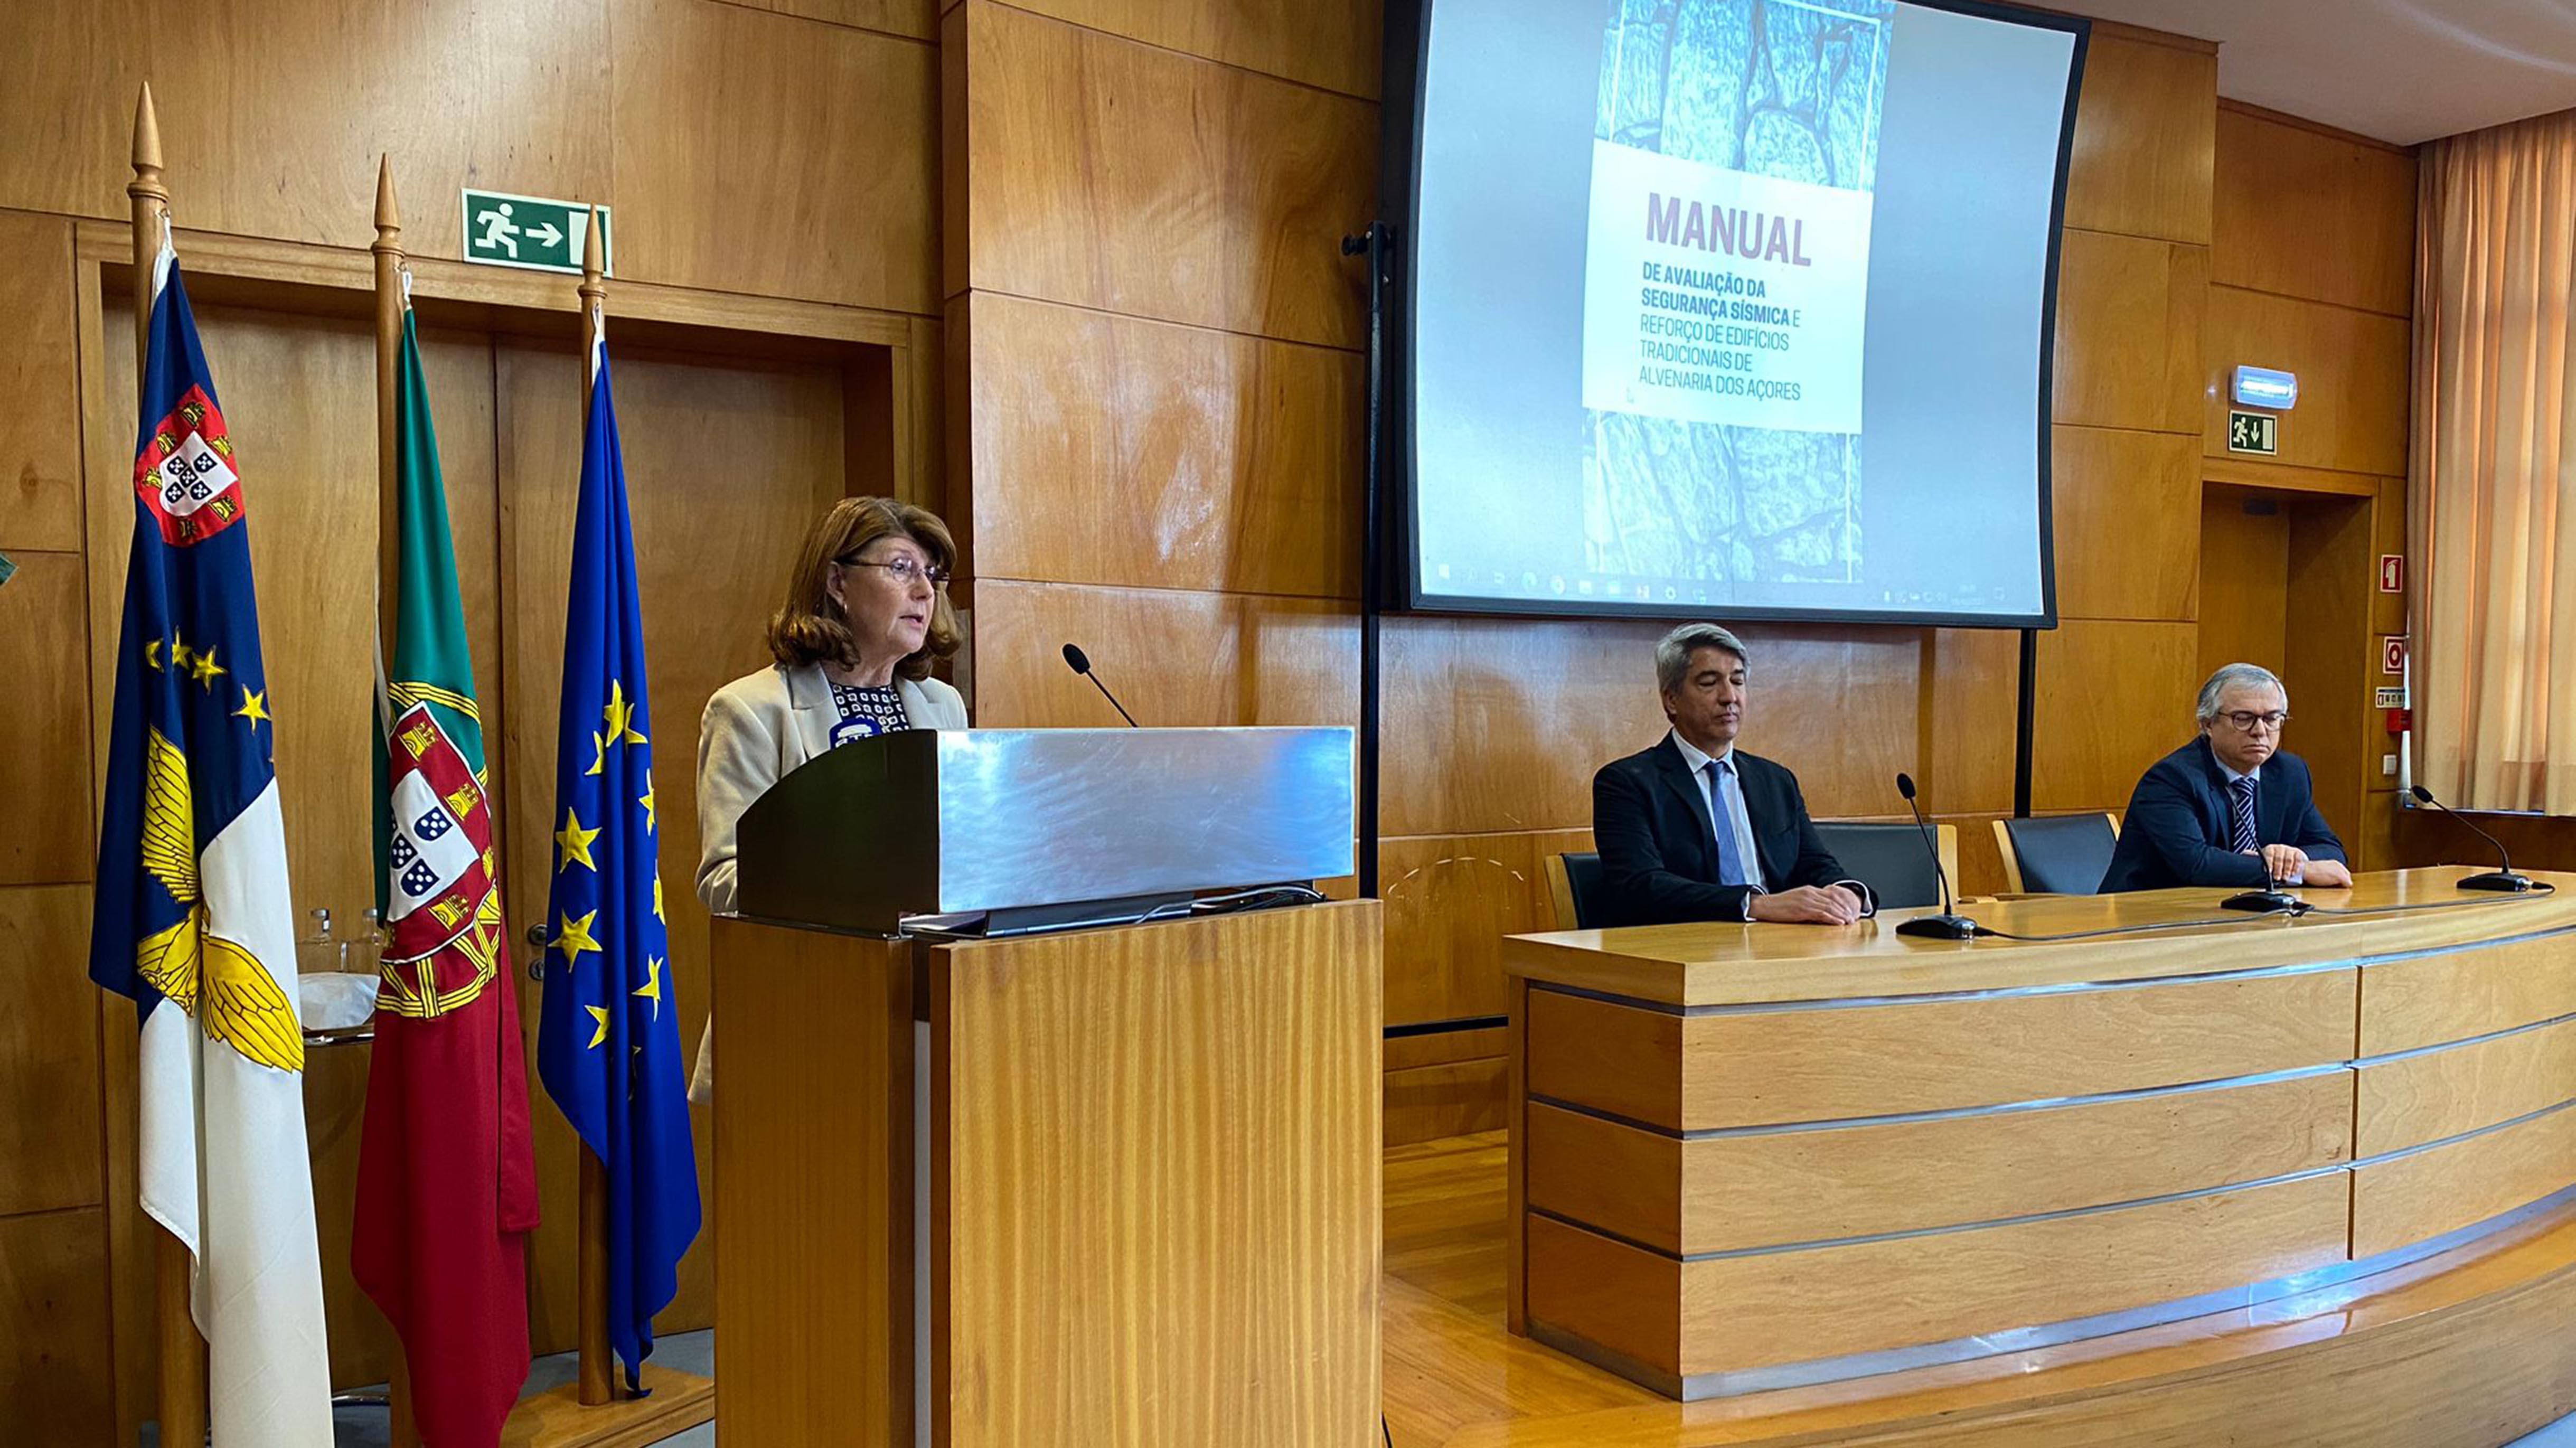 Berta Cabral chairs launch of the Handbook on Seismic Safety and Reinforcement of Traditional Masonry Buildings in the Azores